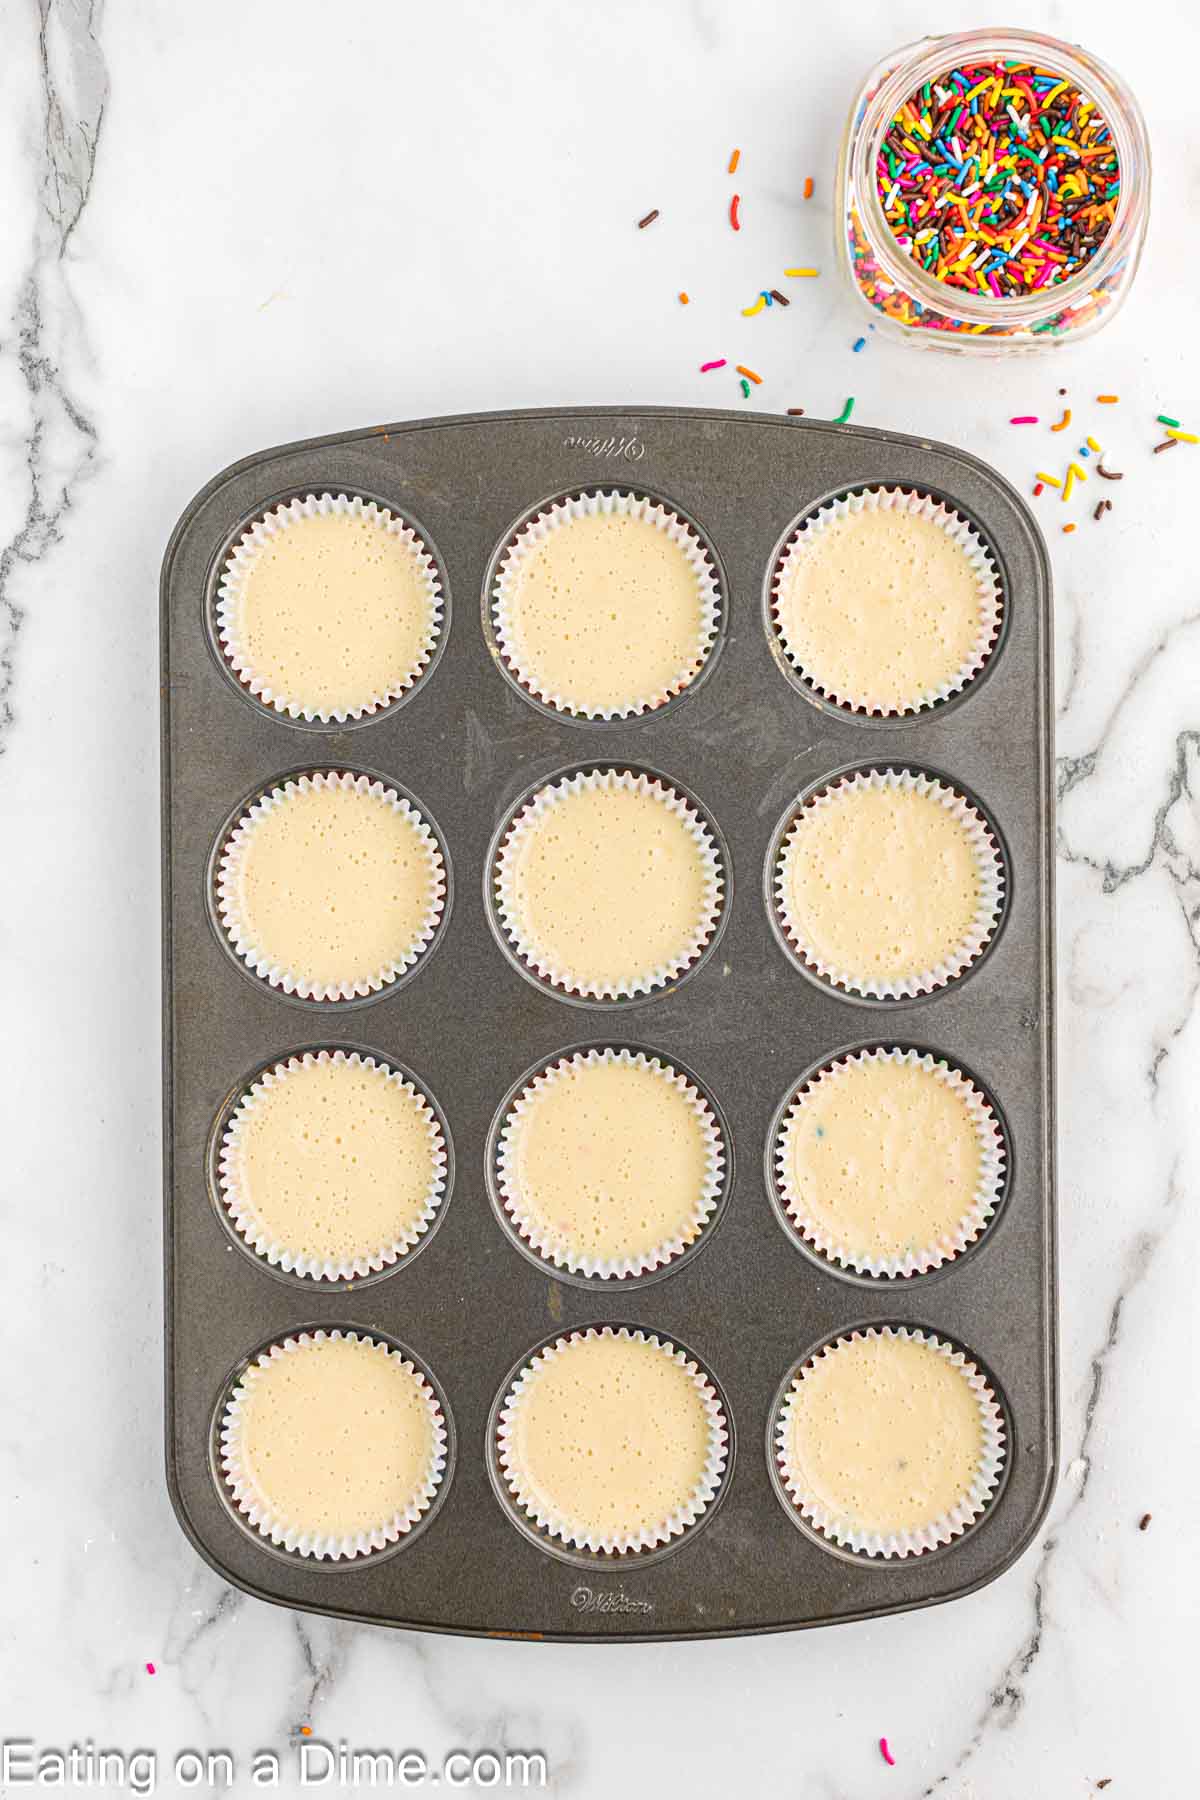 Dividing the cupcake batter into paper liners in a cupcake pan